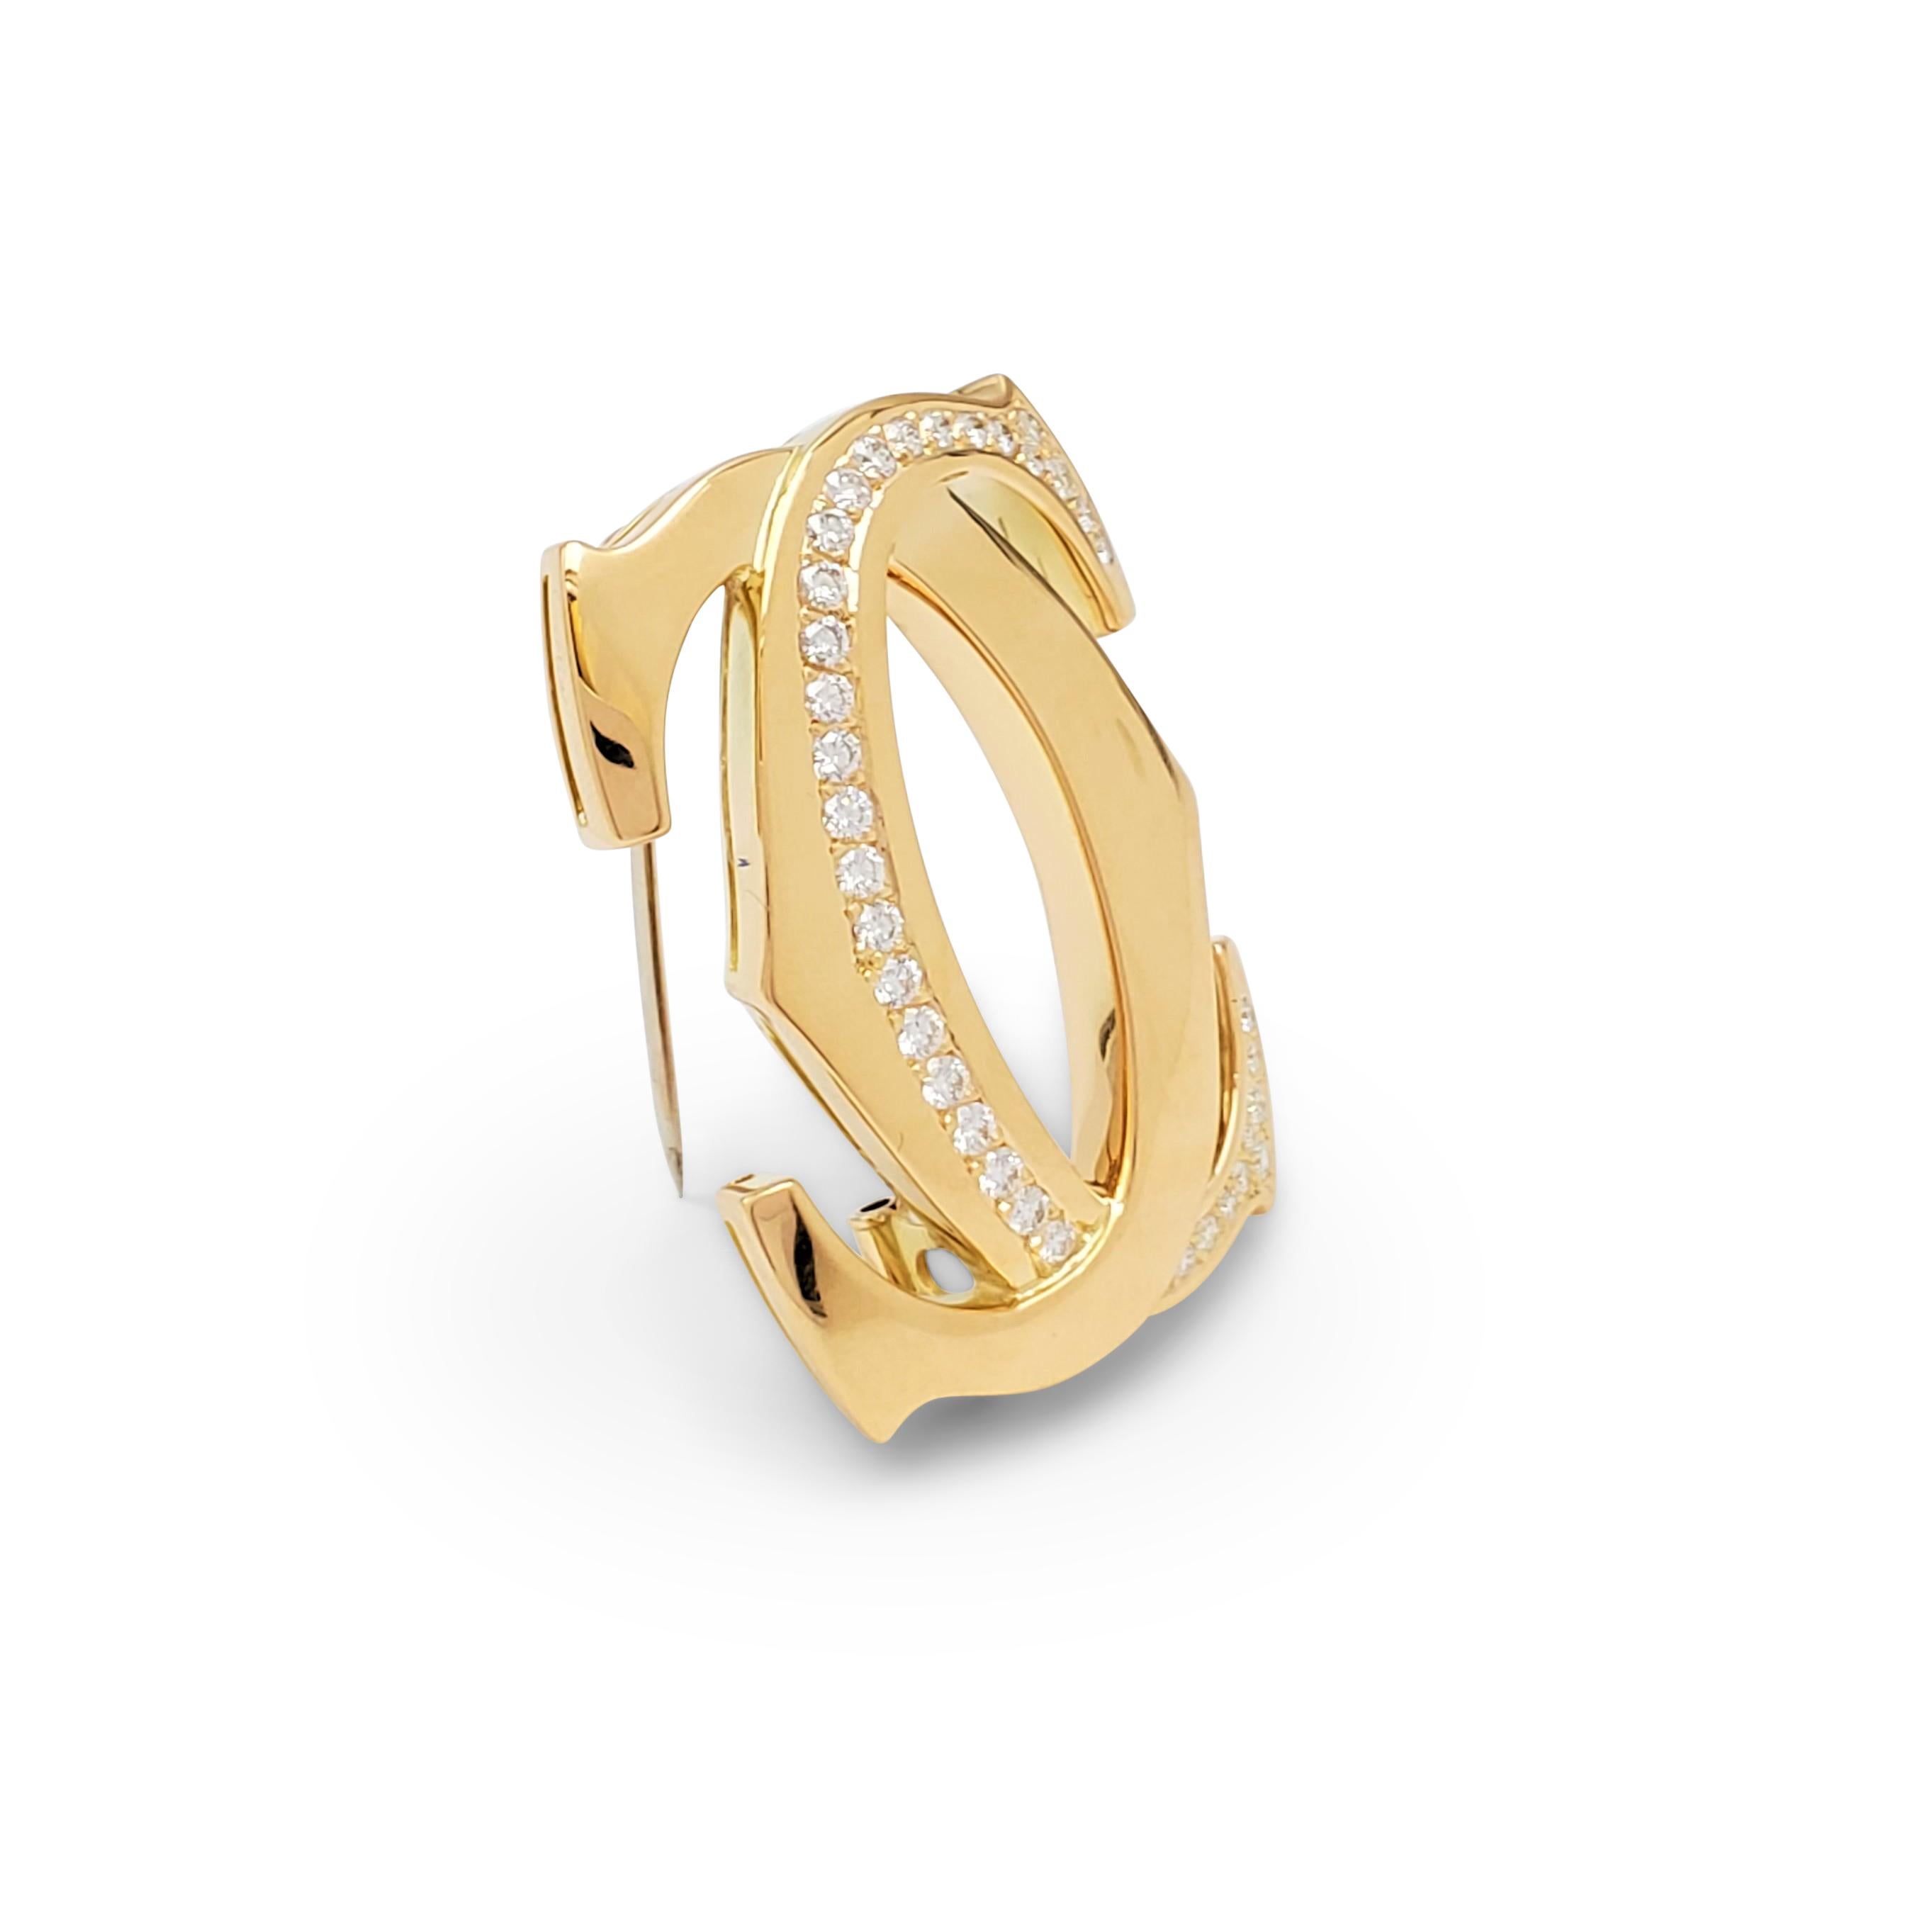 Authentic Cartier 'Penelope' pin crafted in 18 karat yellow gold centers on the iconic interlocking Cartier double-C motif set with an estimated 1.05 carats total weight of round brilliant cut diamonds (E-F color, VS clarity). Signed Cartier, 750,